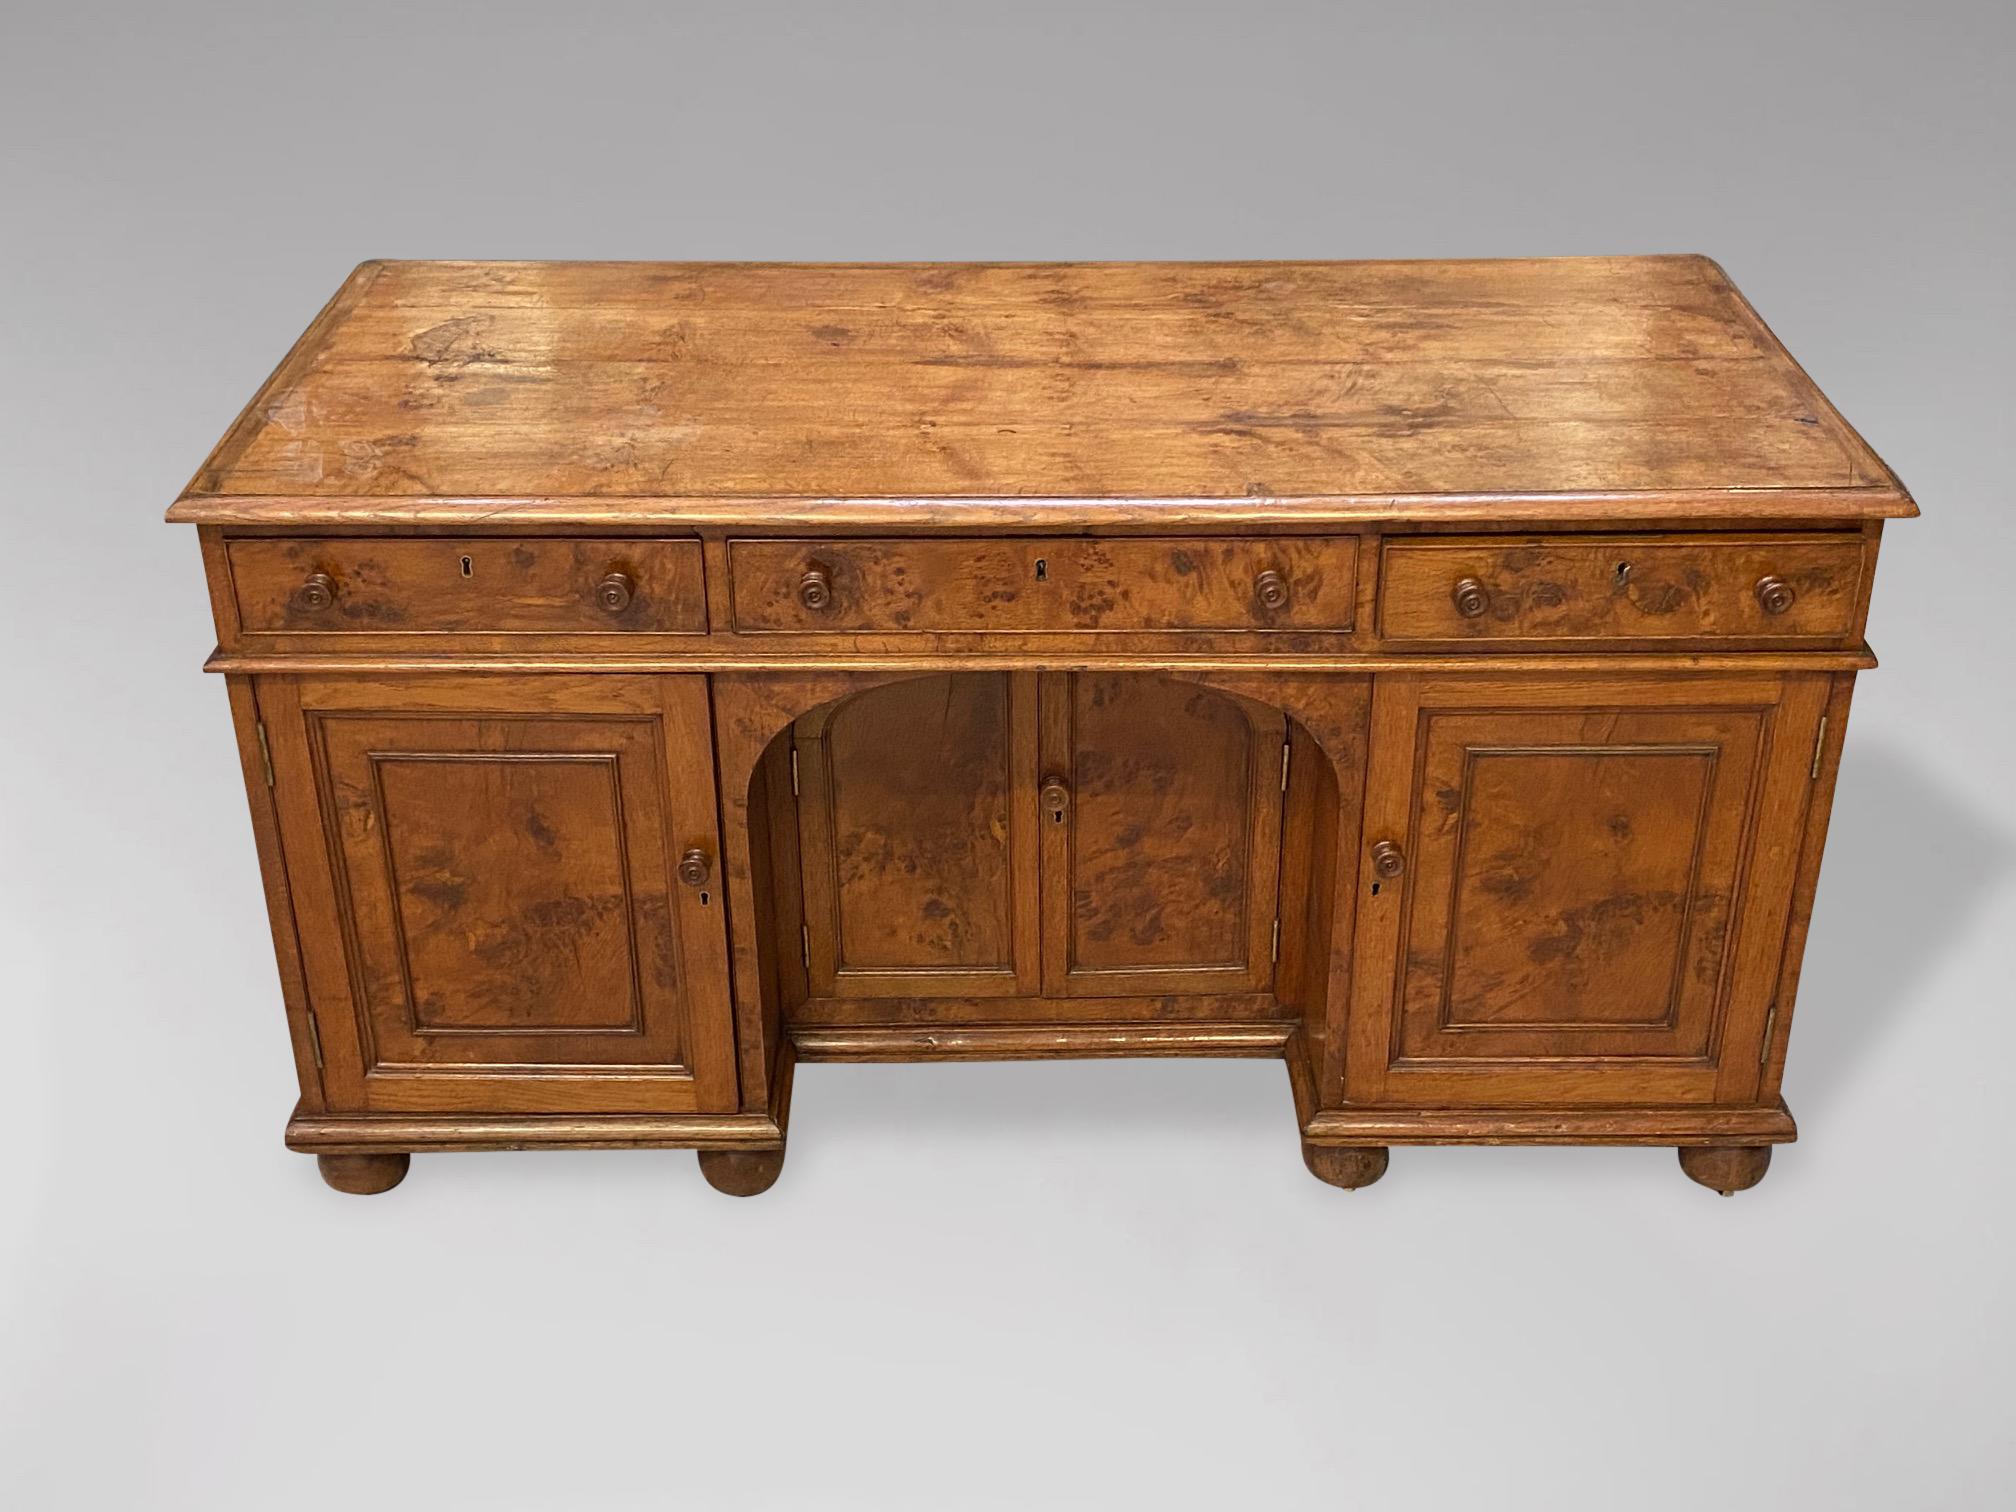 Hand-Crafted 19th Century Desk in Pollard Oak For Sale